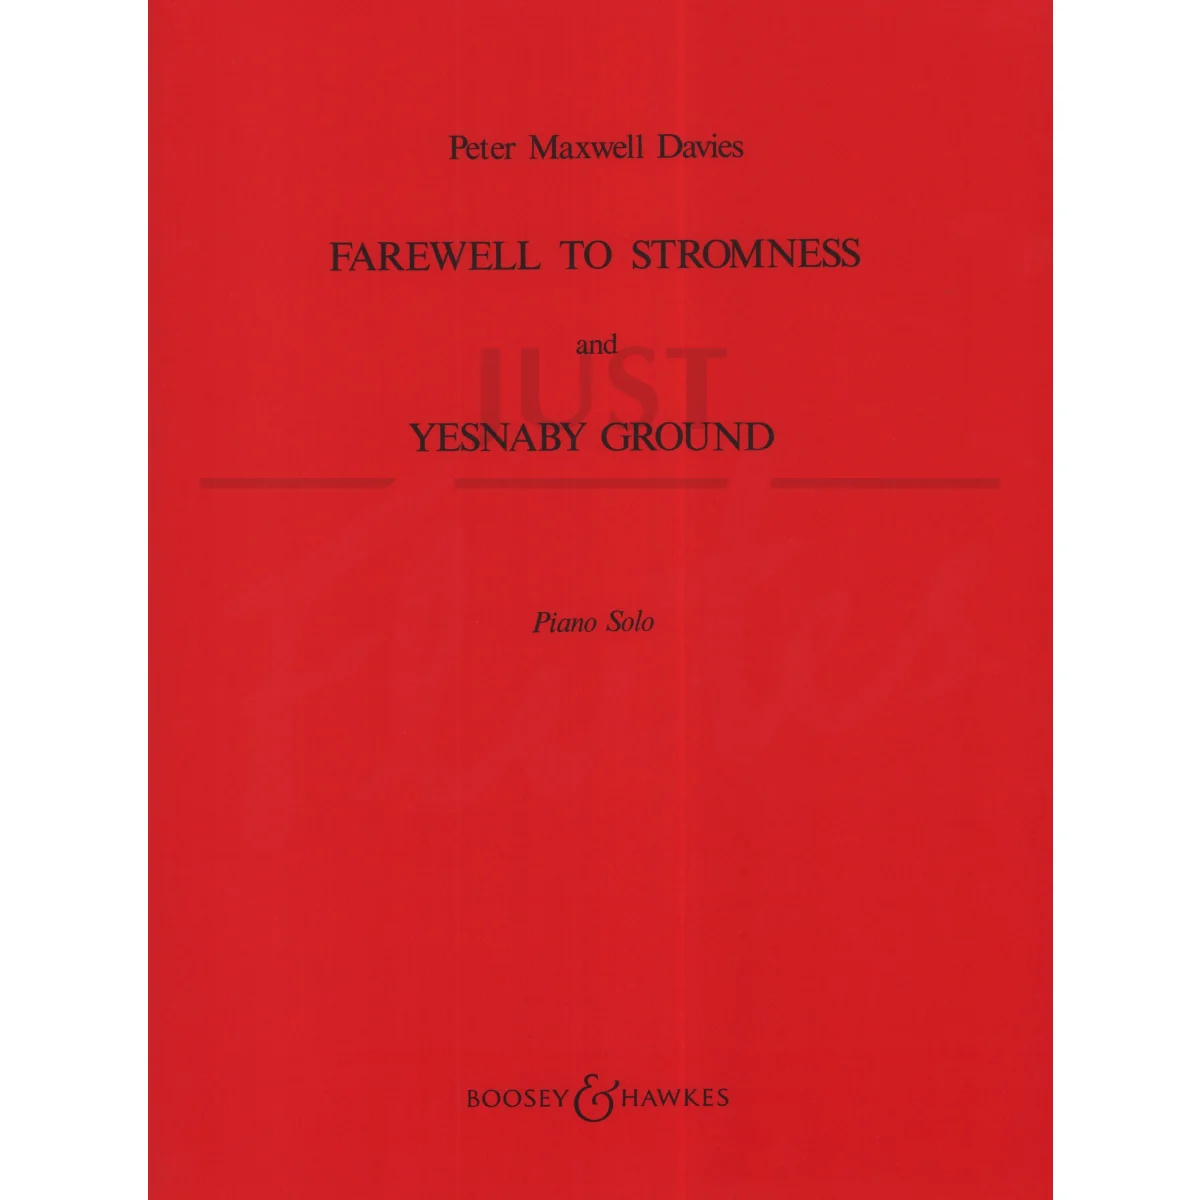 Fairwell to Stromness and Yesnaby Ground for Piano Solo